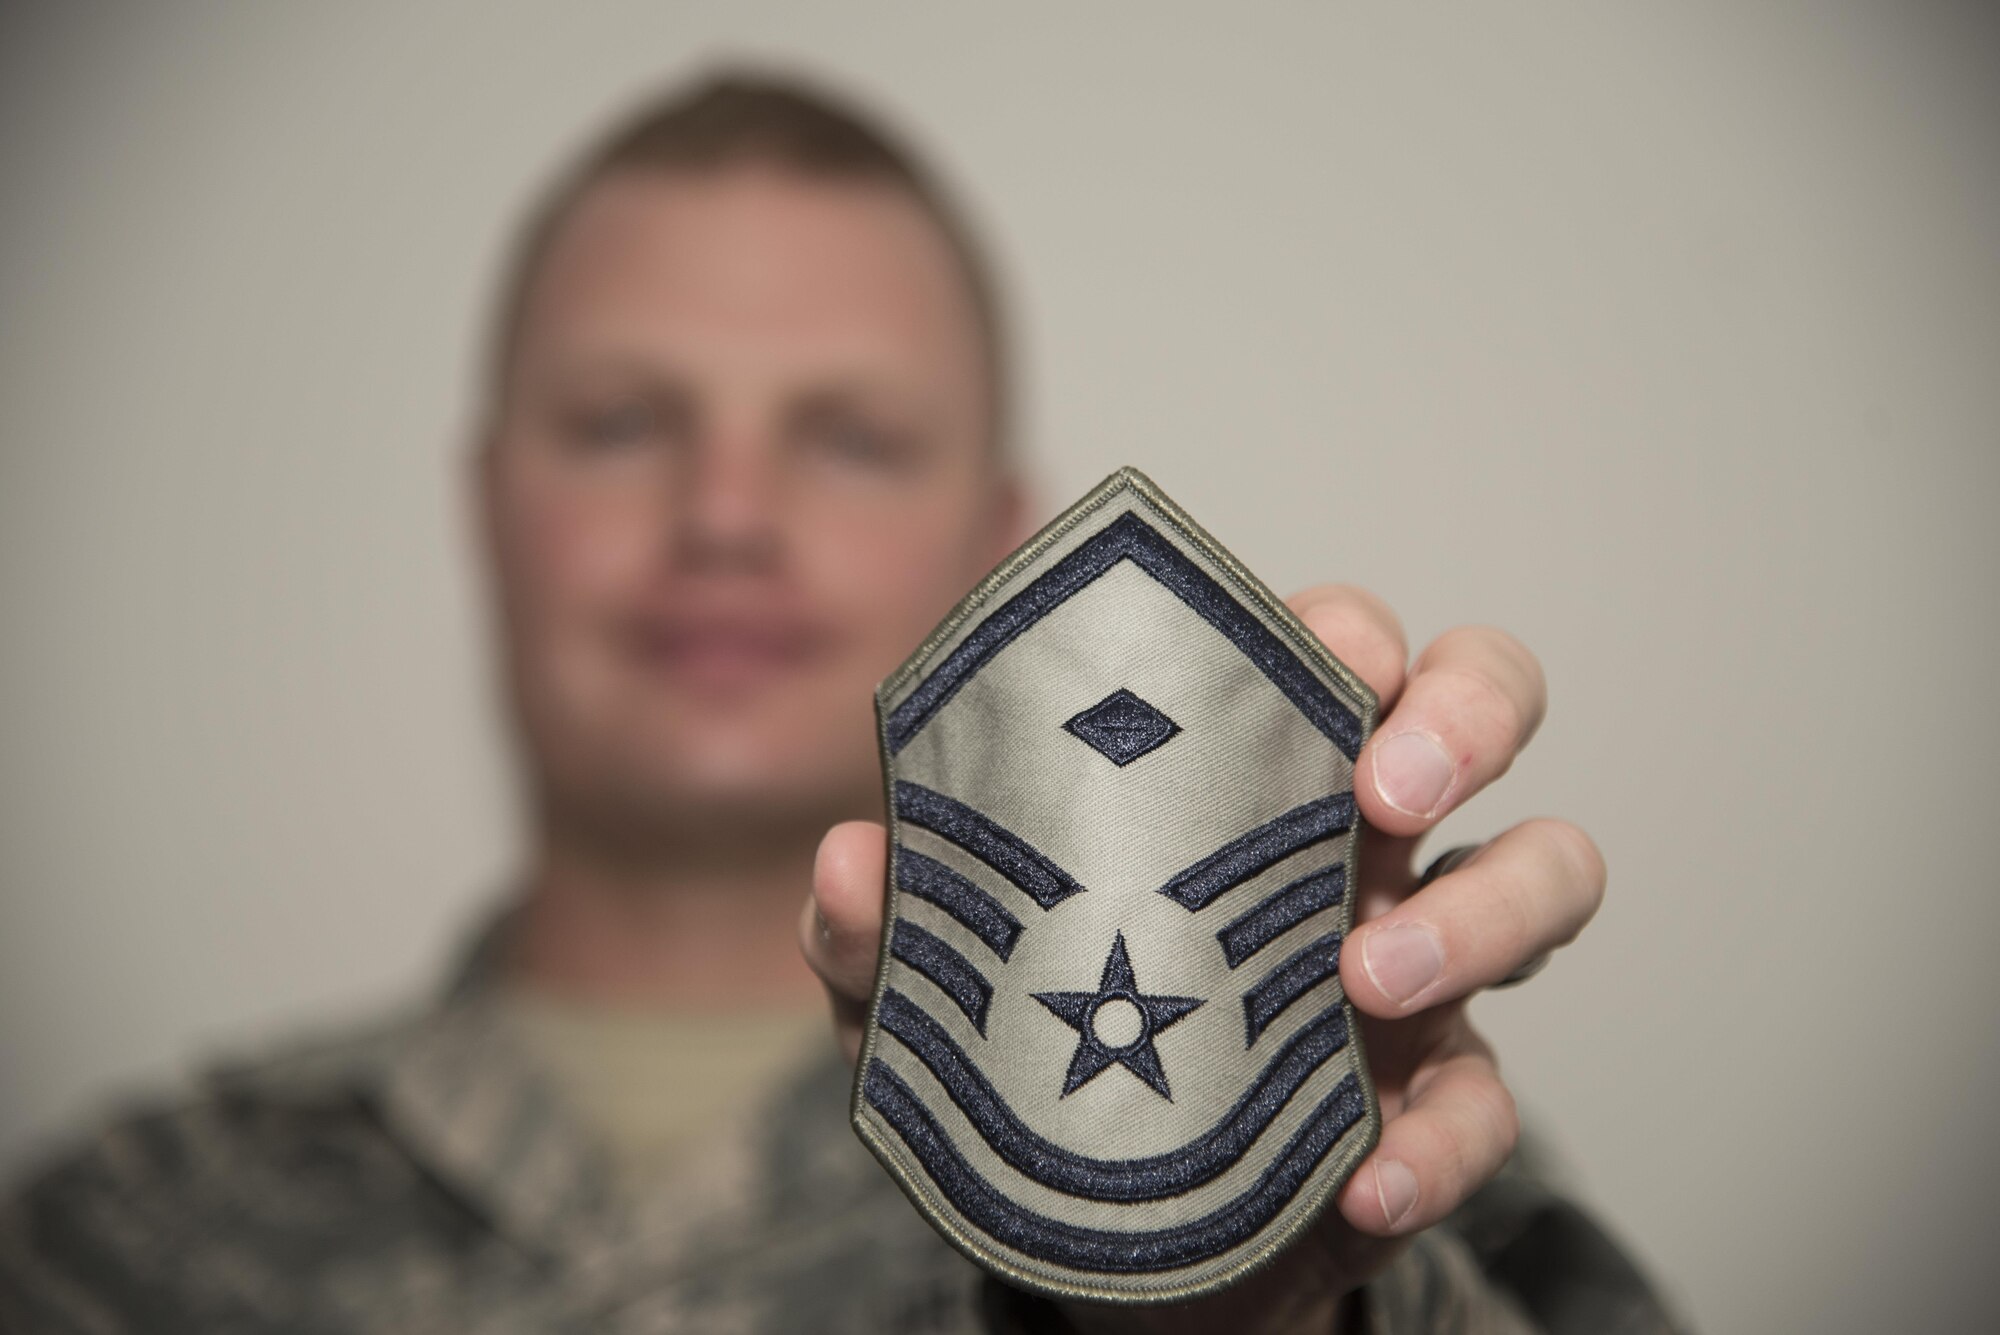 U.S. Air Force Master Sgt. Ryan Douglas, the 35th Communications Squadron first sergeant, displays a first sergeant rank insignia at Misawa Air Base, Japan, Sept. 26, 2016. First sergeants offer a four-day course called Additional Duty First Sergeant Symposium, for those interested in learning how the shirts operate and handle various situations. (U.S. Air Force photo by Airman 1st Class Sadie Colbert)